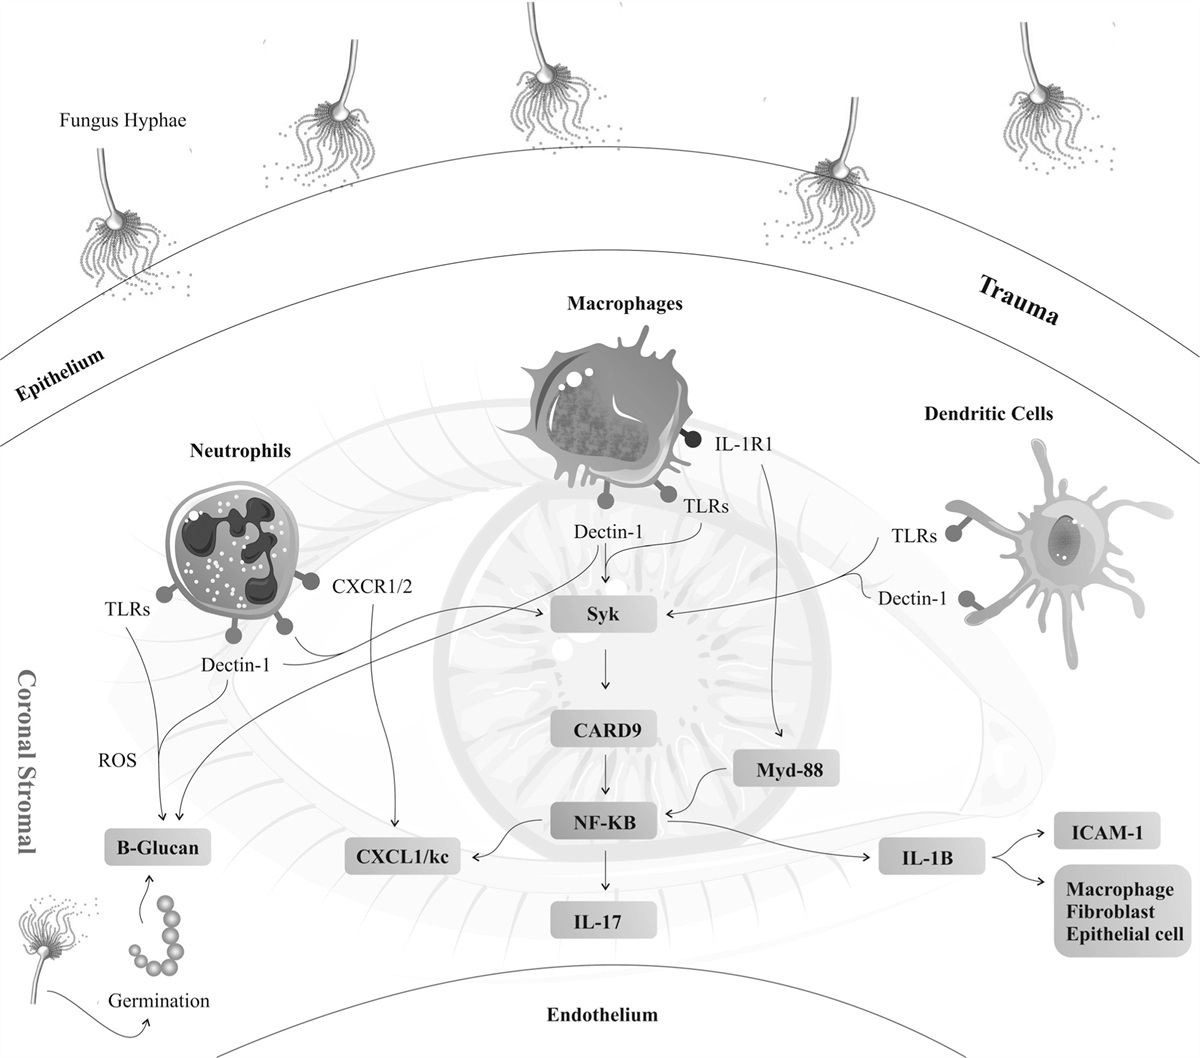 The role of the therapeutic potential of noncoding RNAs in fungal keratitis. A studies review